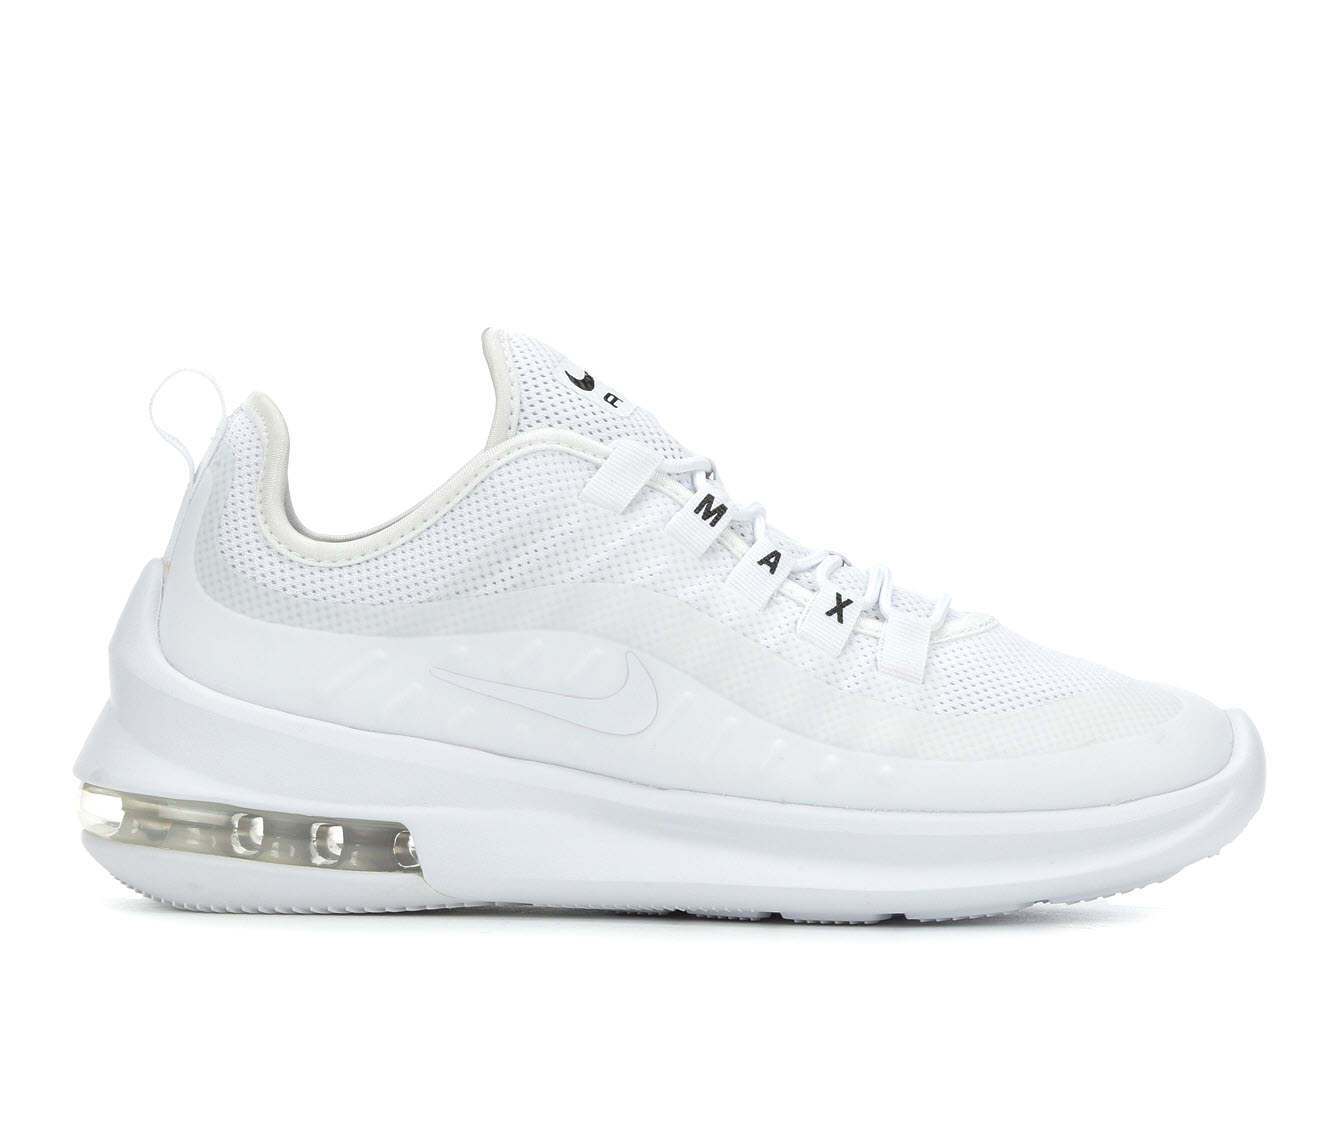 Nike Air Max Axis Women's Athletic Shoe 